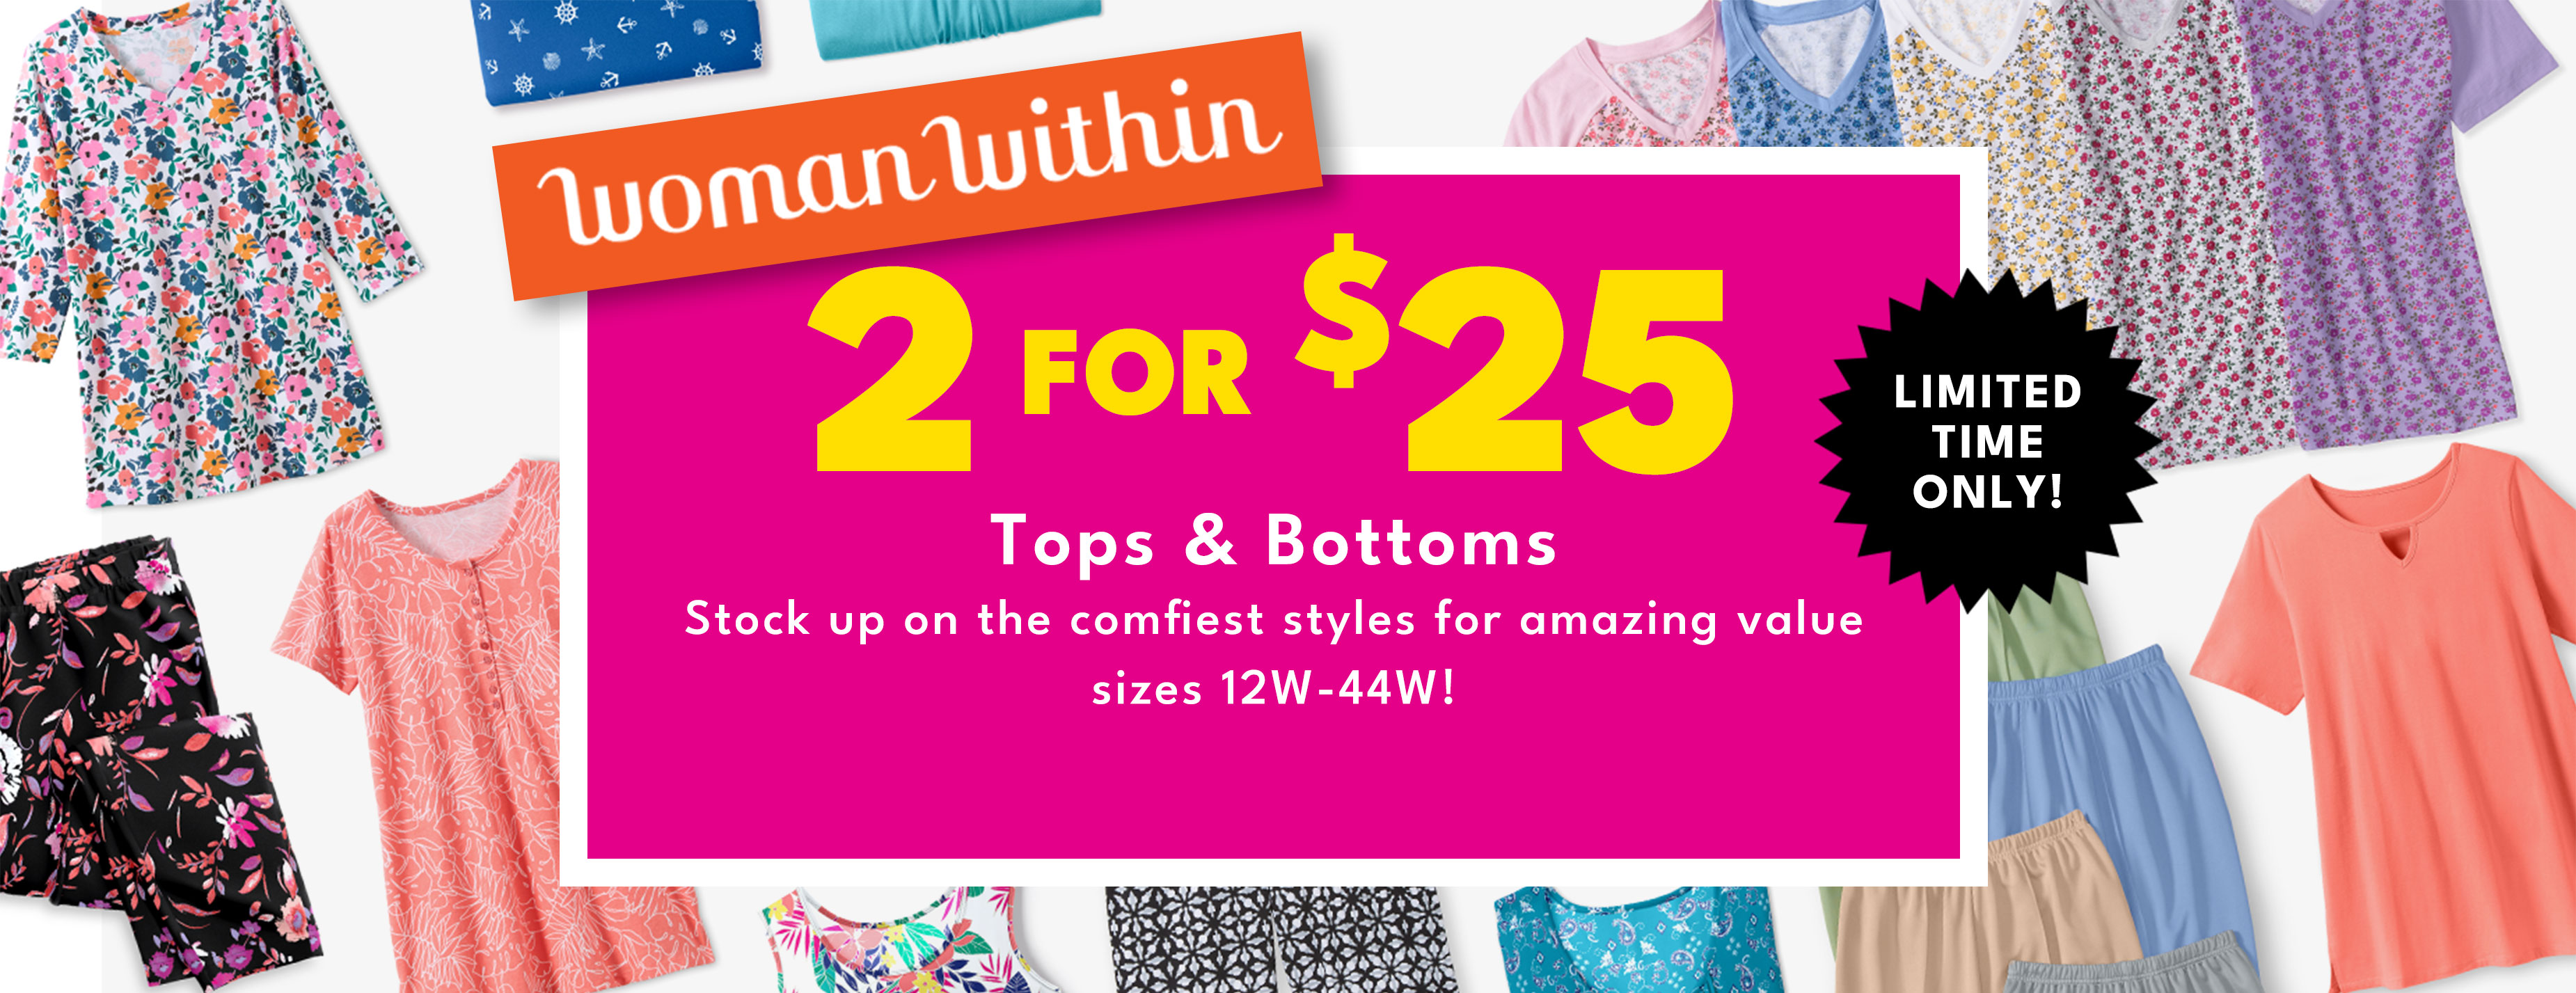 Woman Within 2 for $25 tops & bottoms save on the easiest styles to wear together every day! Shop the sale